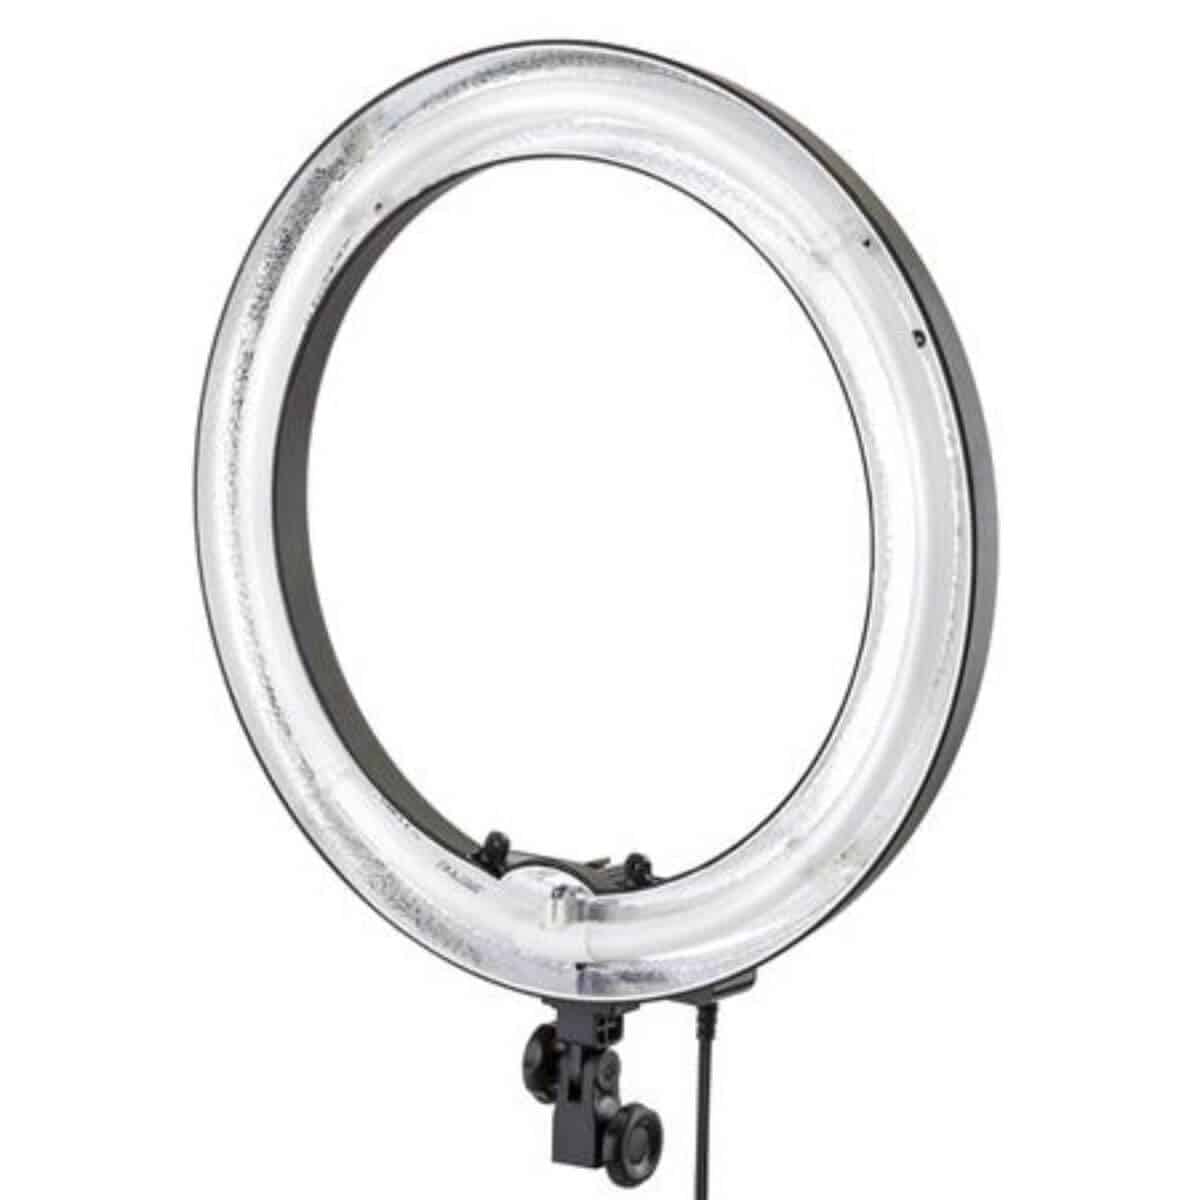 Close-up of a ring light.